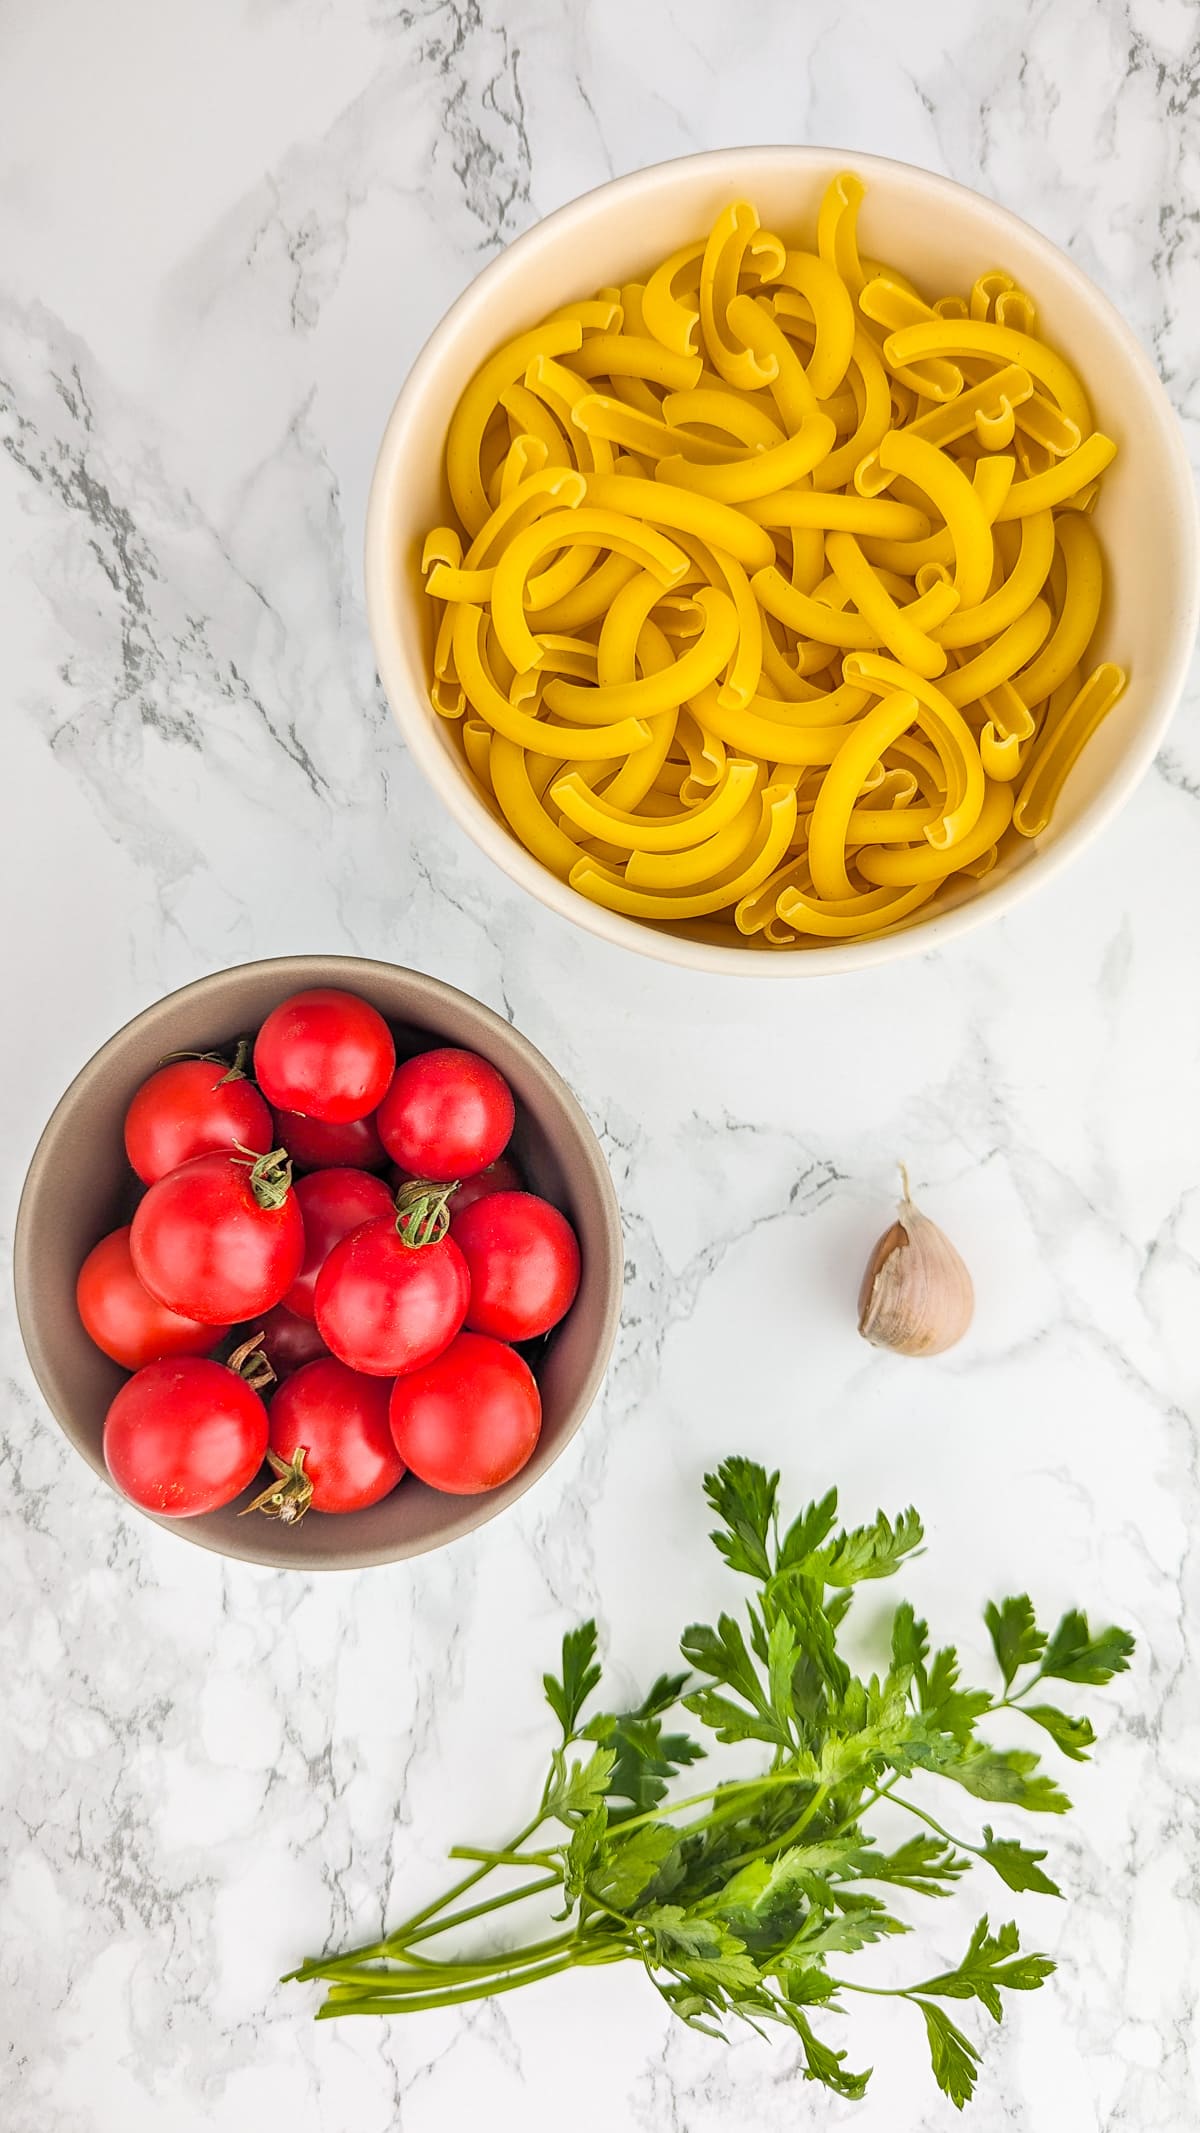 Top view of a white plate with pasta, tomatoes, parsley and garlic on a white marble table.